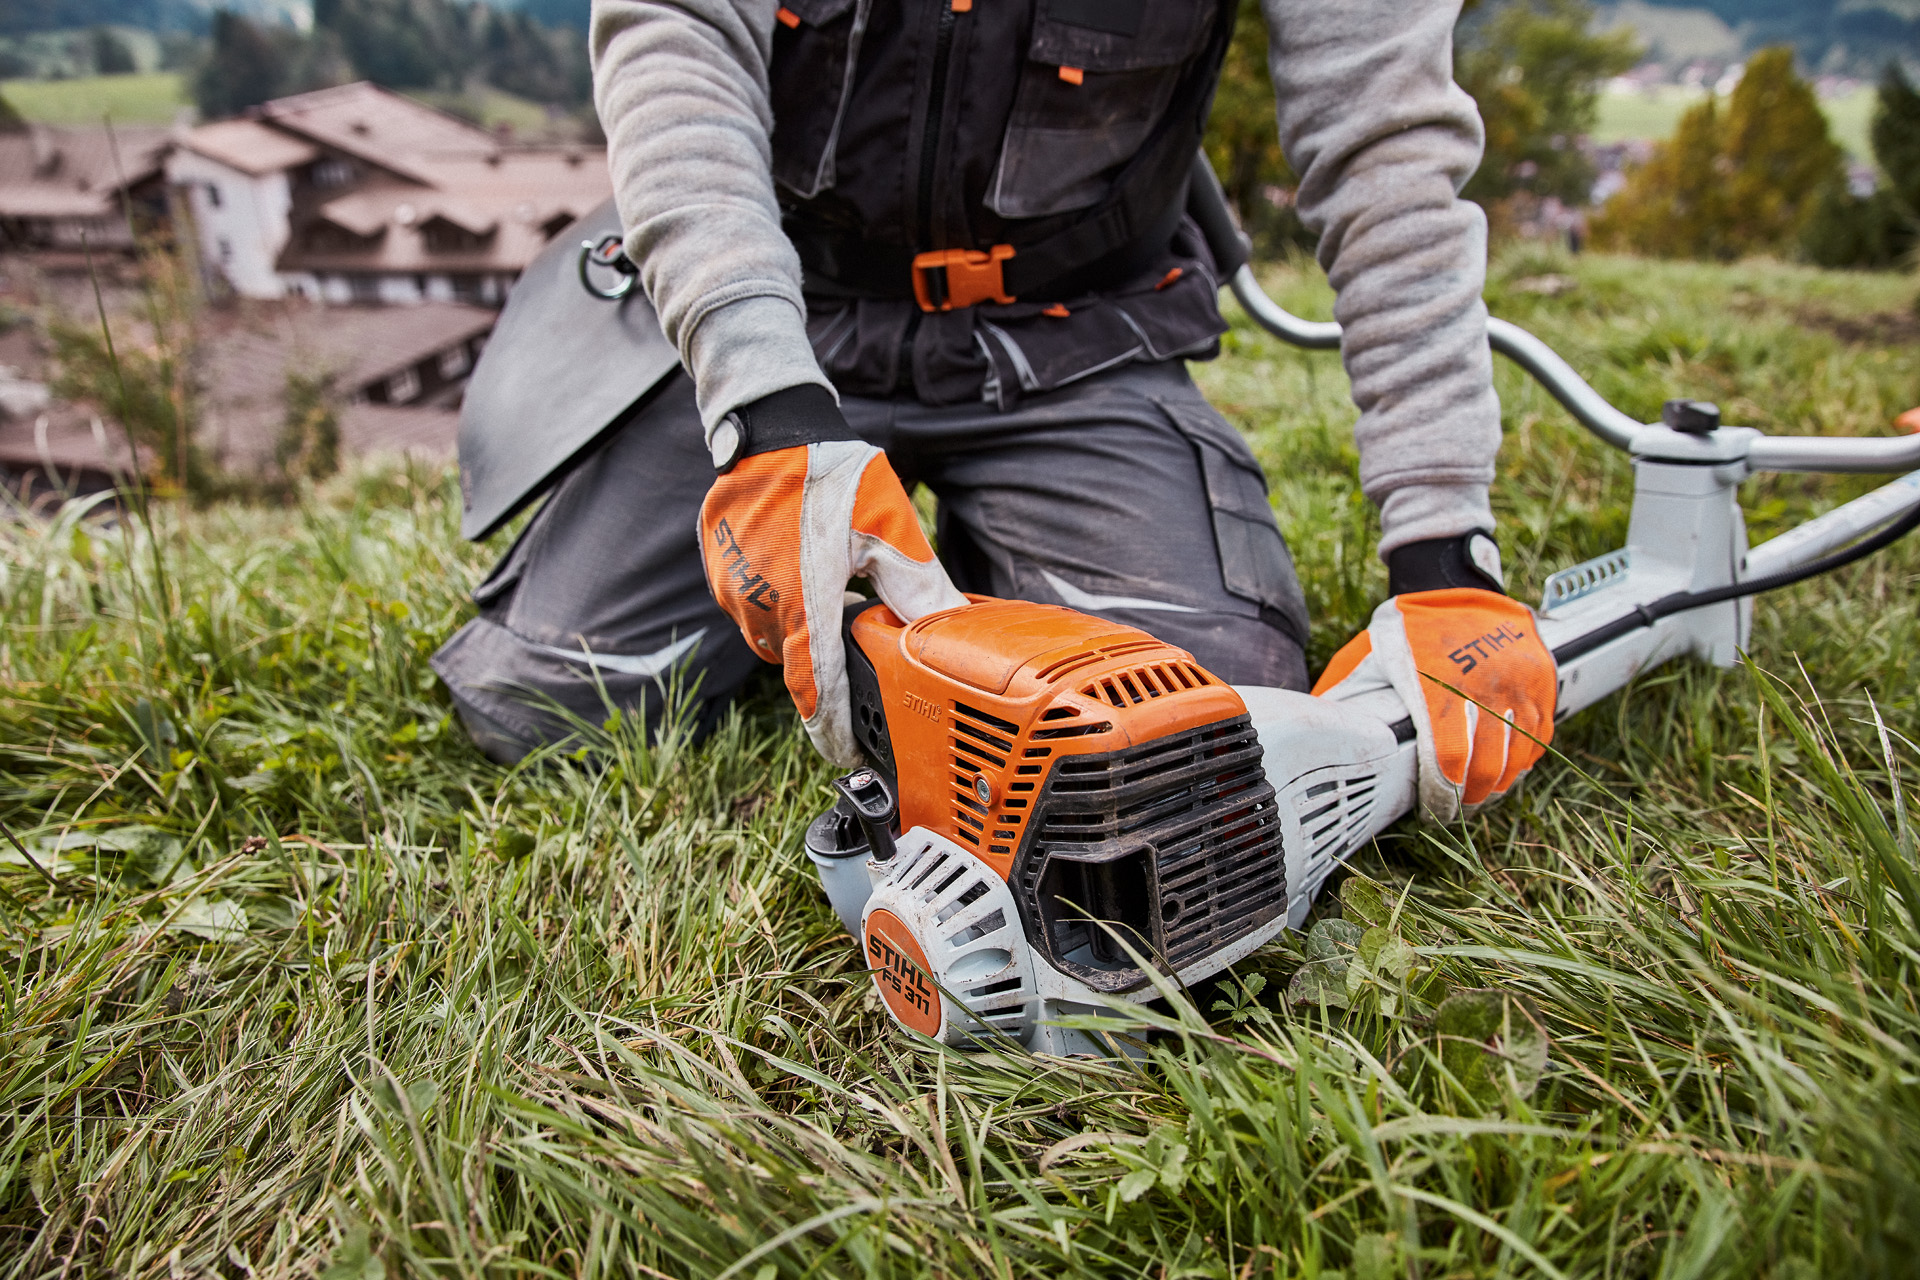 https://www.stihl.in/content/dam/stihl/mediapool/products/brushcutters-and-clearing-saws/petrol/fs-311/f51a4e68f59f44779ed7546b36181a3f.jpg